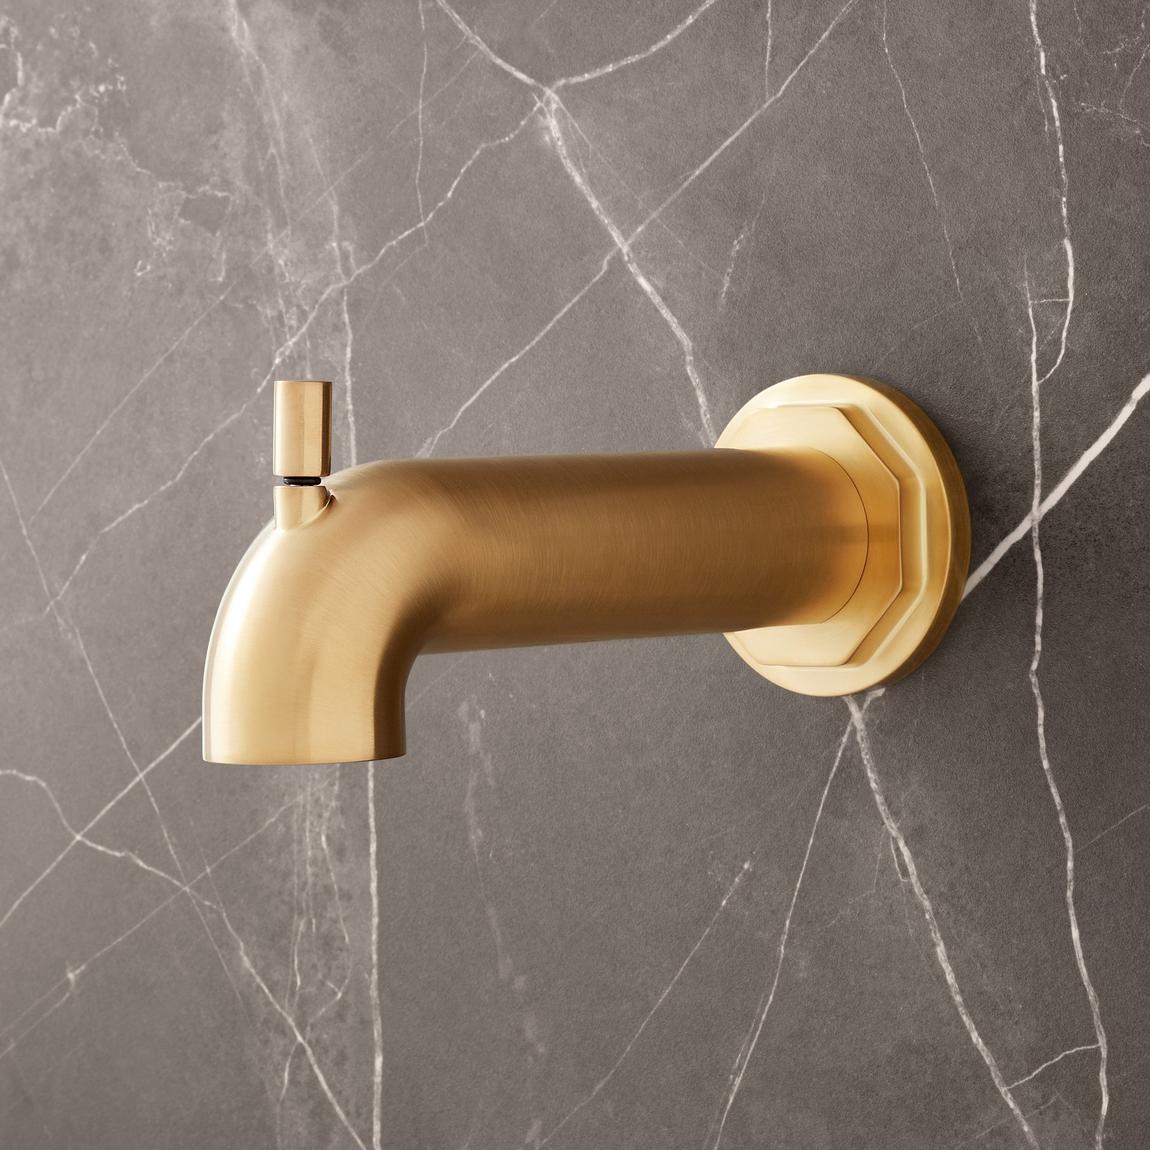 Tub Faucets, Clawfoot Tub Faucets | Signature Hardware